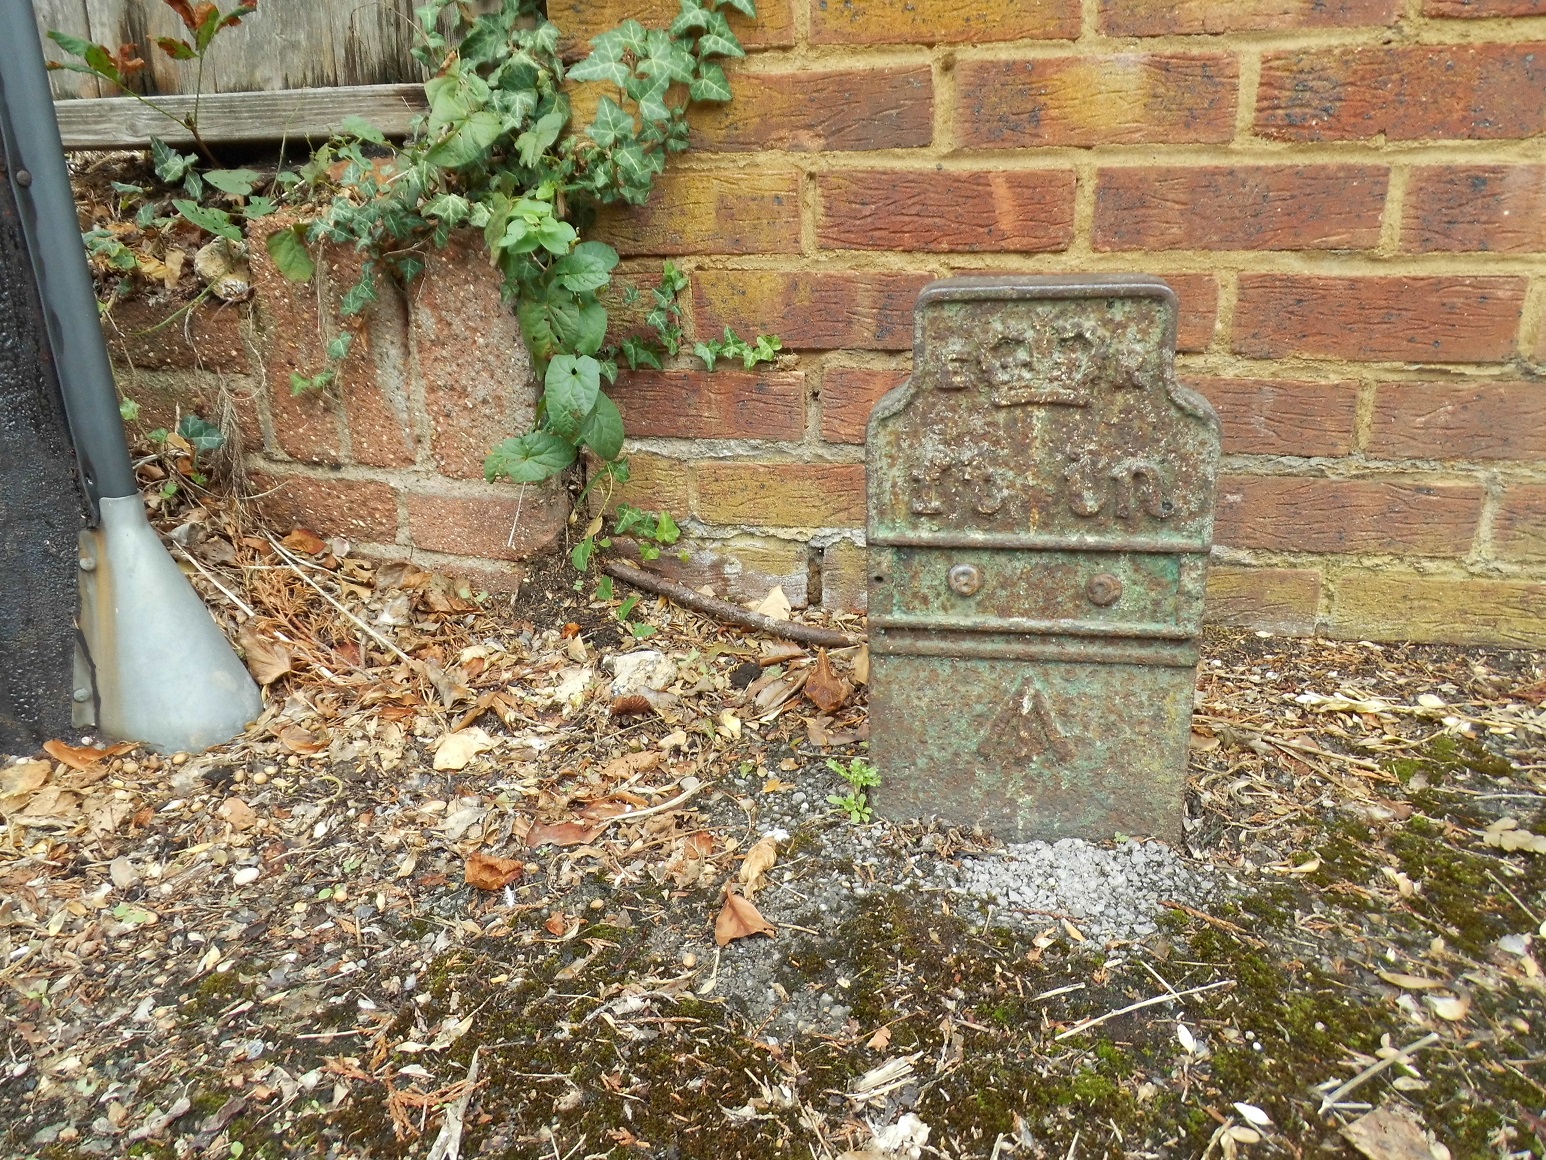 Telegraph cable marker post at 258 Hempstead Road, Watford by Derek Pattenson 